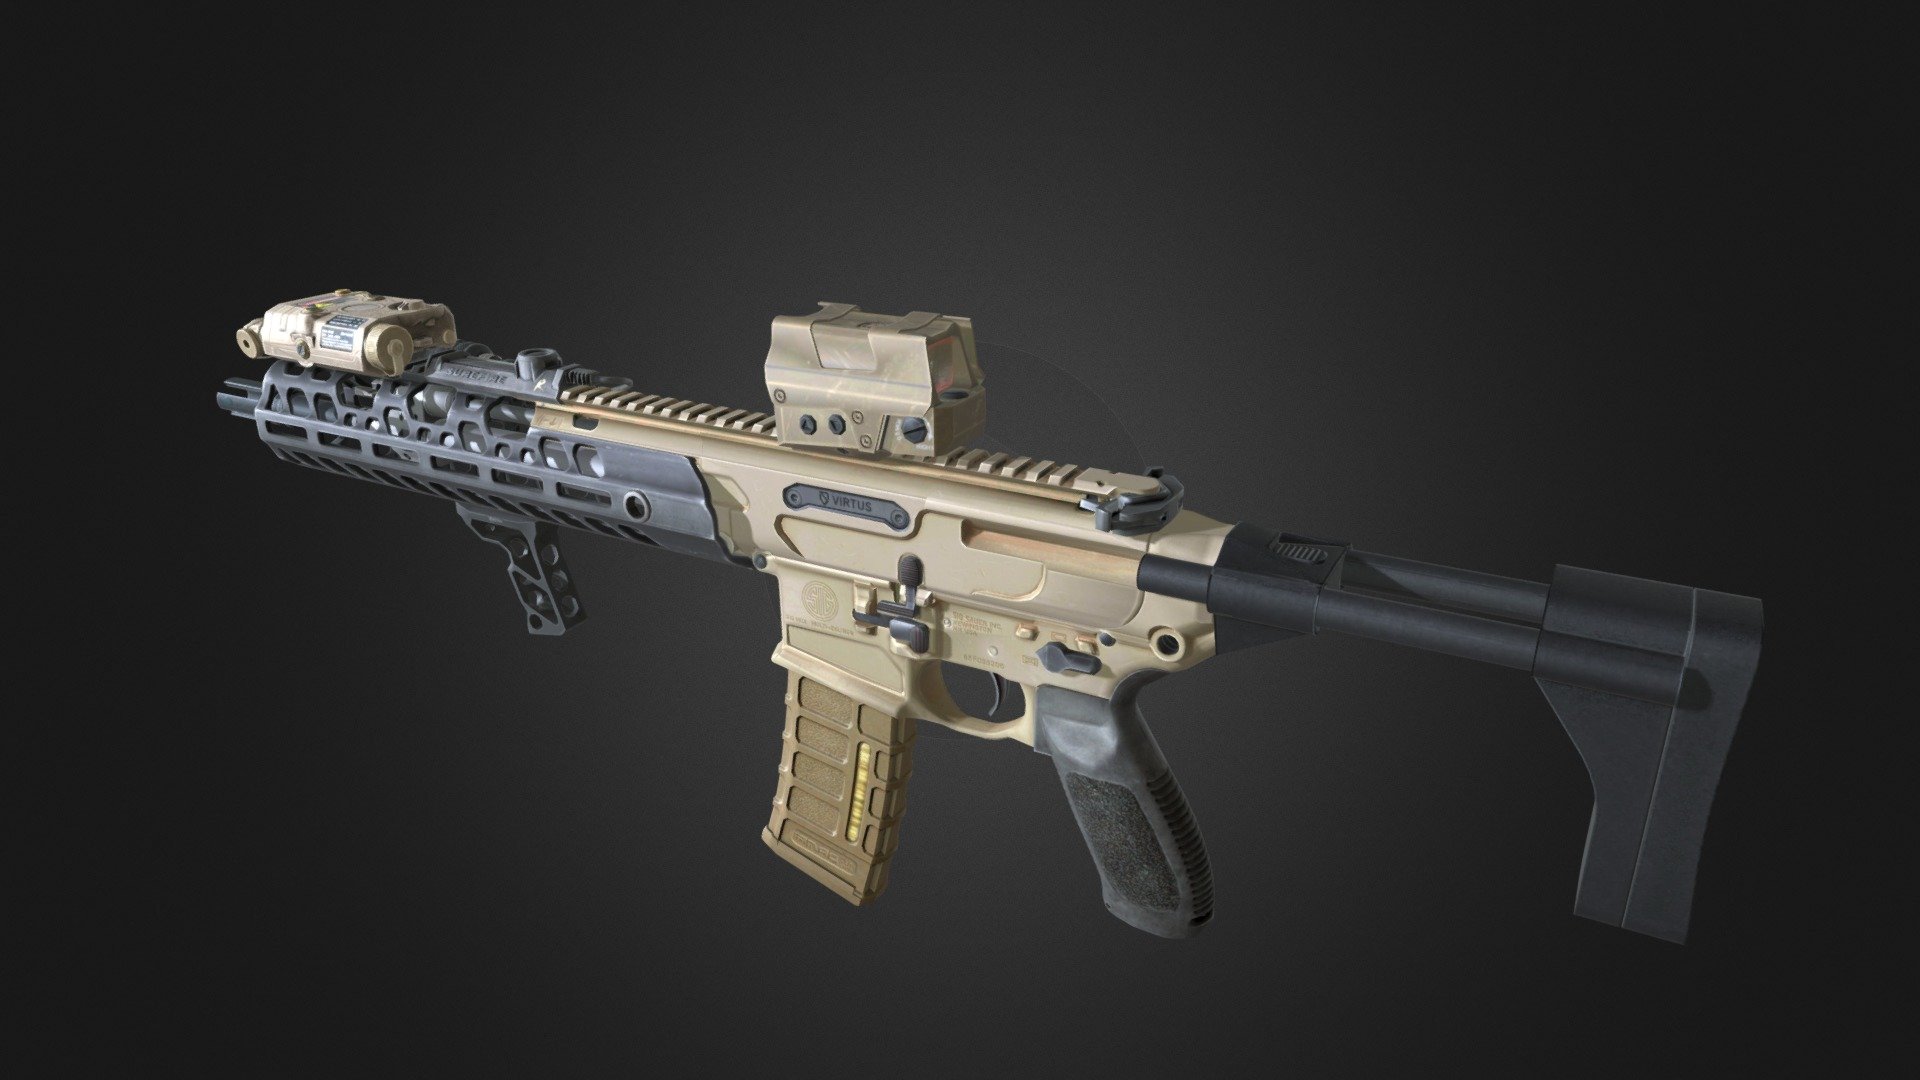 Weapon render for my modding project: https://www.moddb.com/mods/asymmetric-warfare

The SIG MCX VIRTUS SBR is the short-barreled rifle configuration of the MCX VIRTUS. It features a 292 mm (11.5 in) barrel for the 5.56×45mm NATO caliber, and a 140 mm (5.5 in) barrel and 229 mm (9 in) barrel for the .300 AAC Blackout caliber 3d model